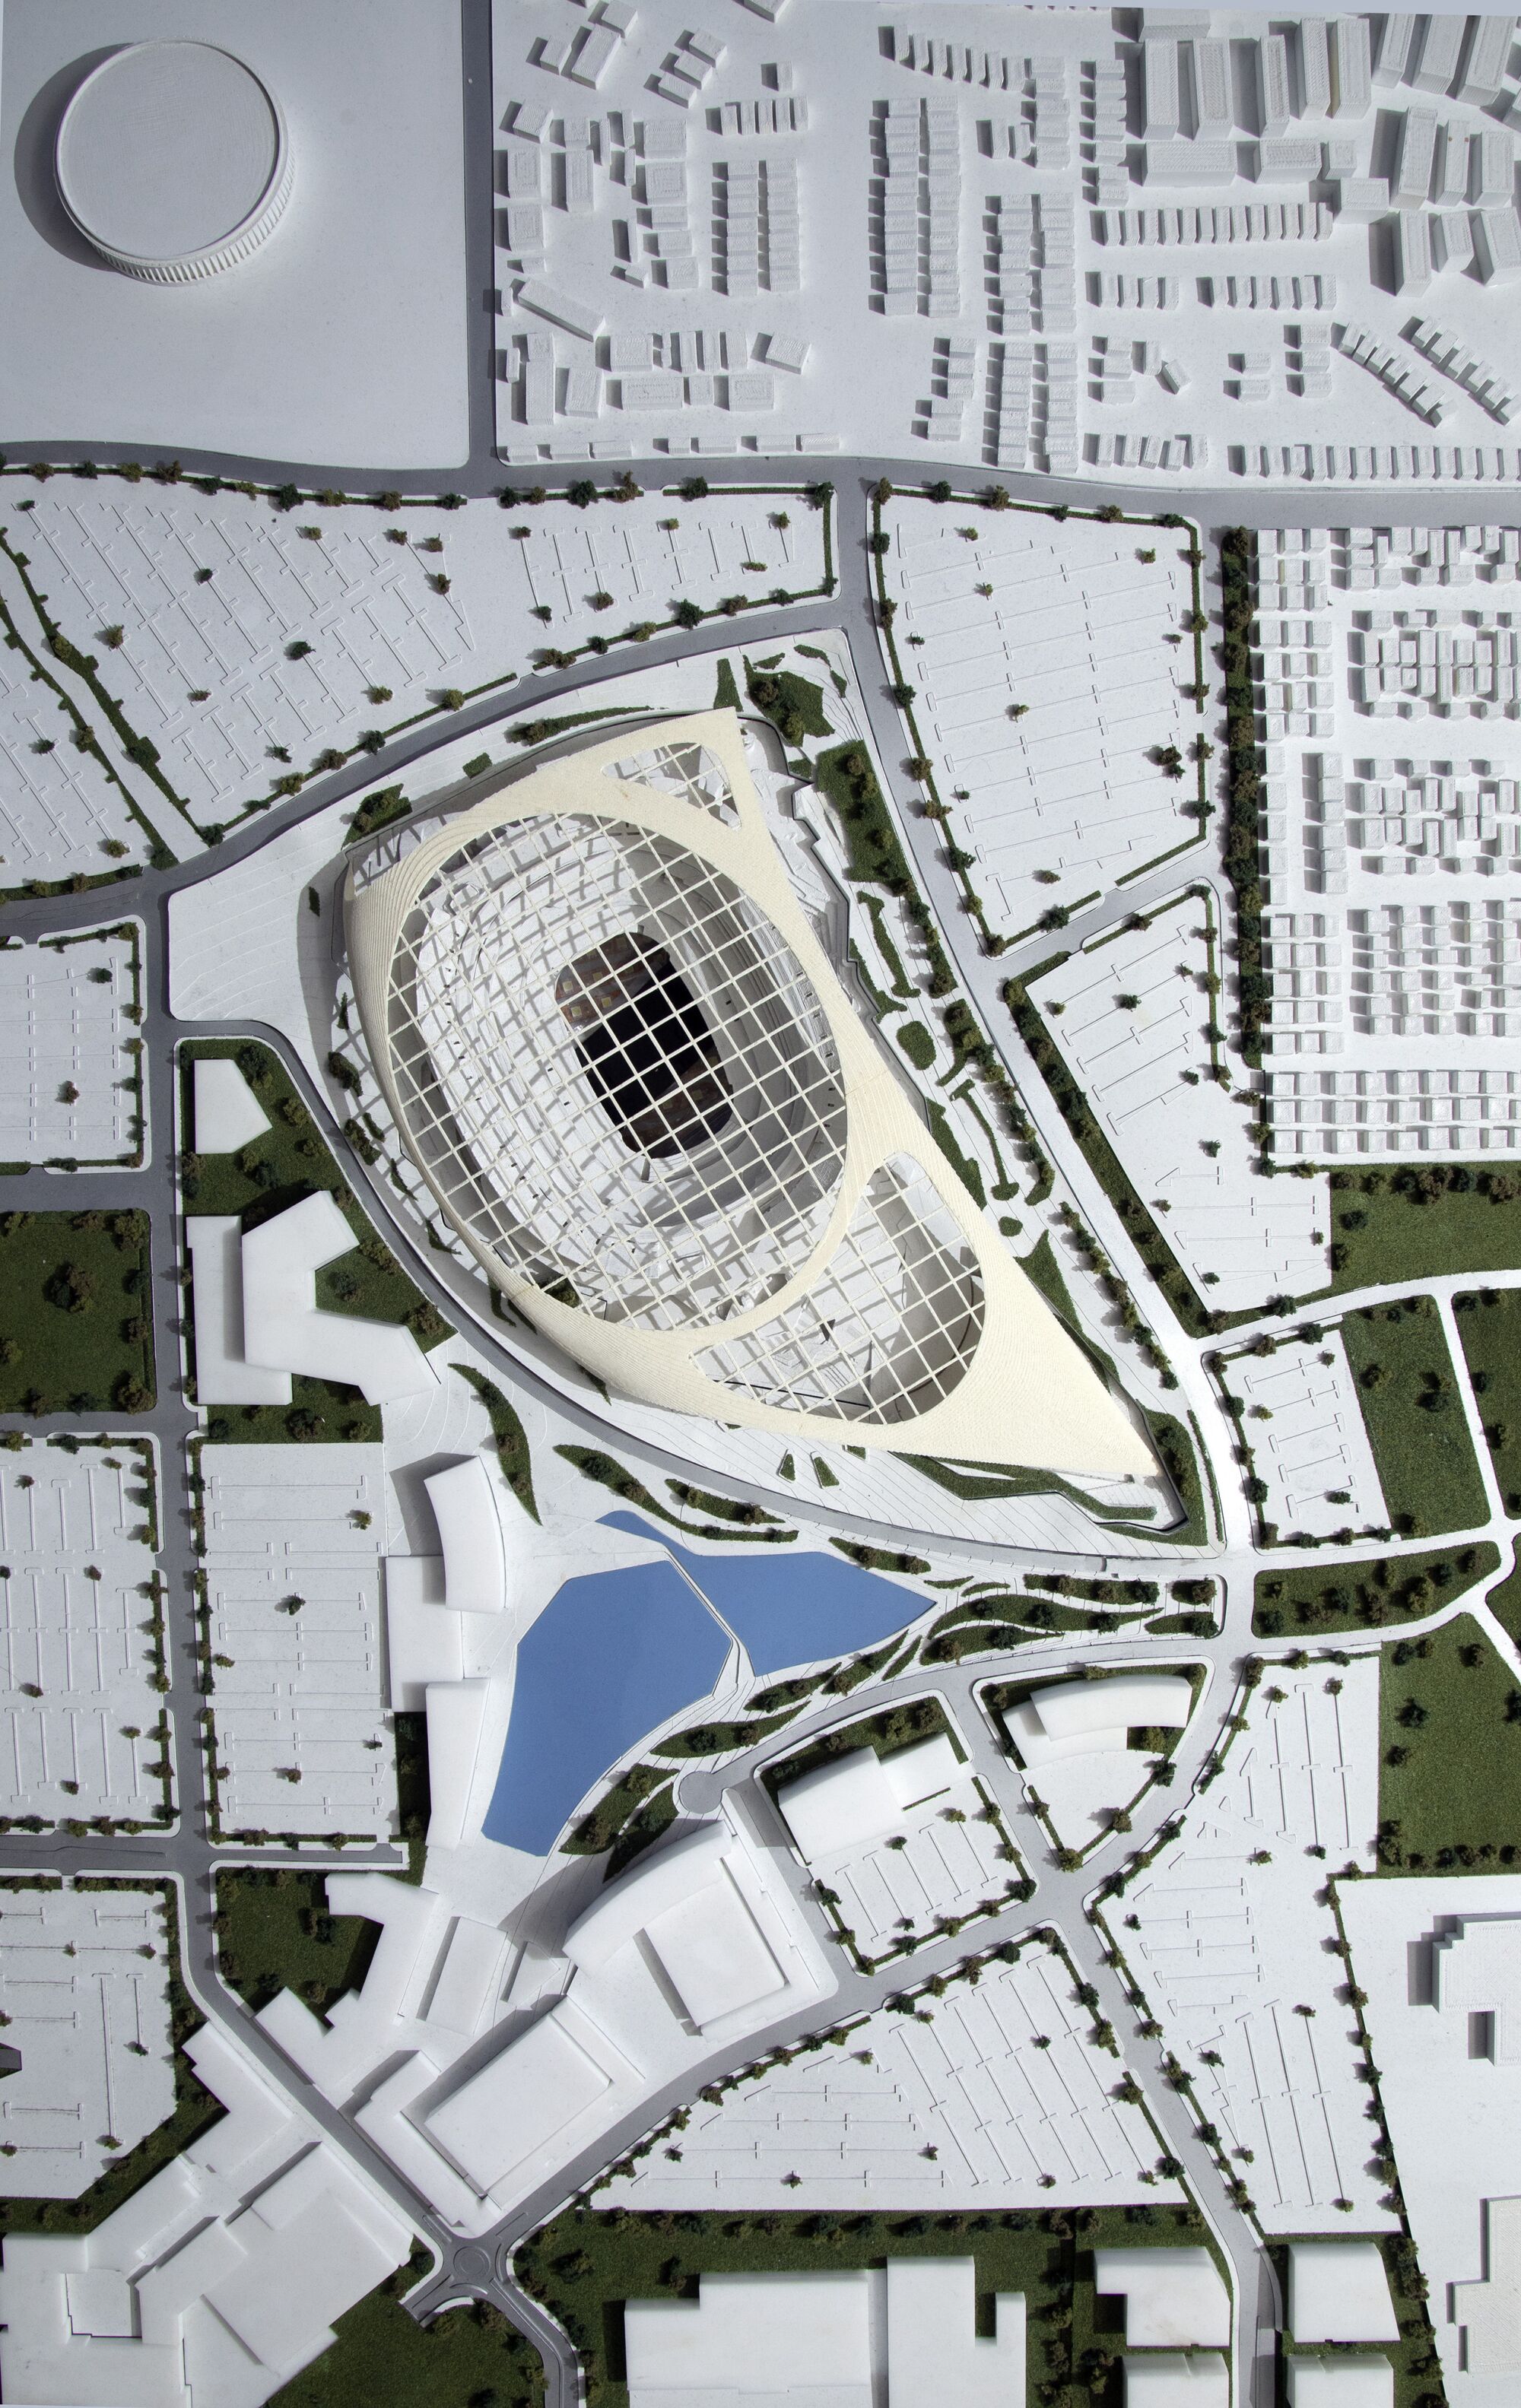 An overhead view of the model for SoFi Stadium also includes a model of the park and surrounding streets